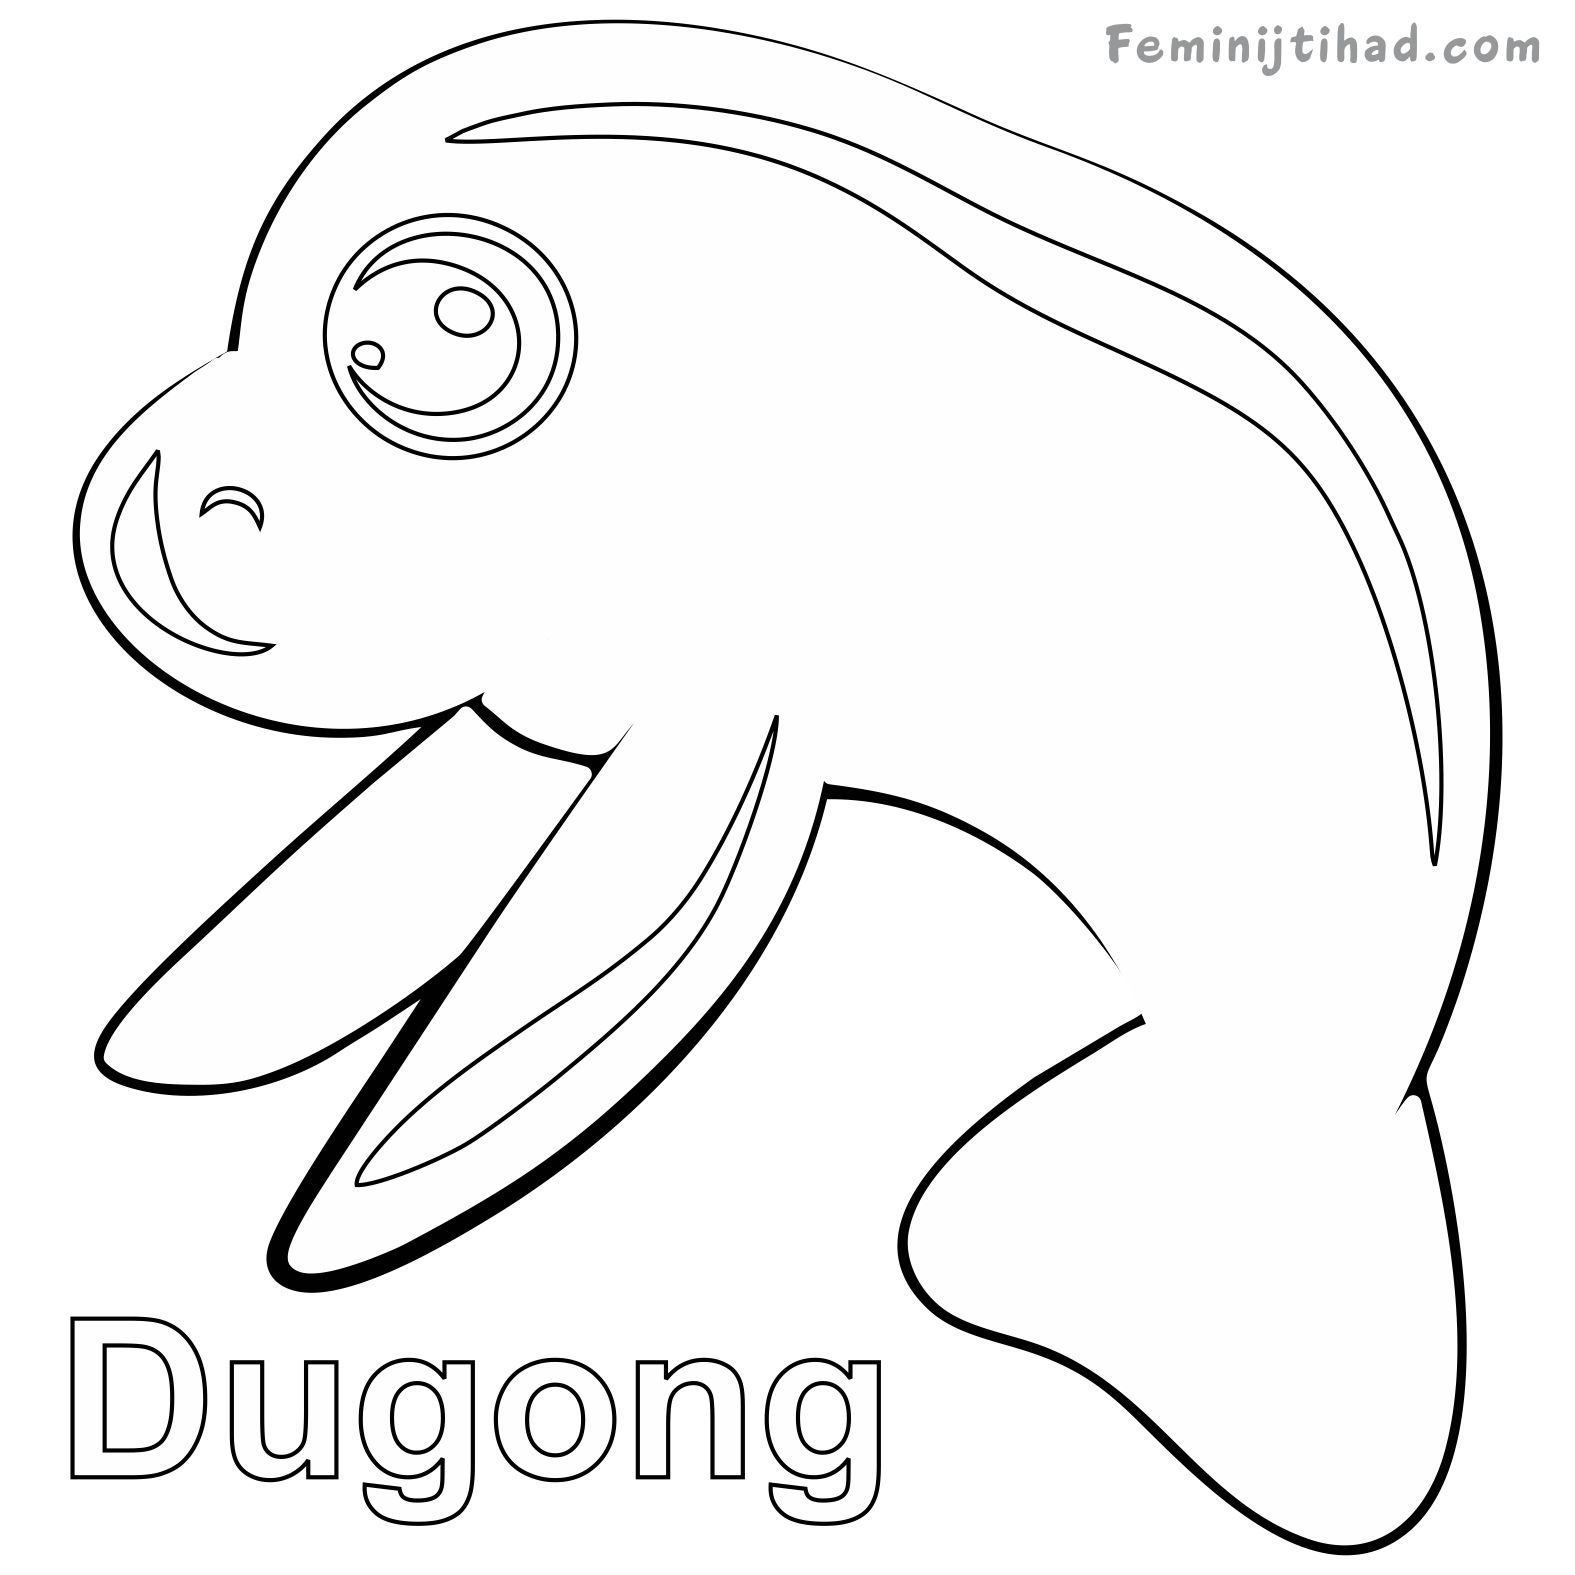 Dugong page to color